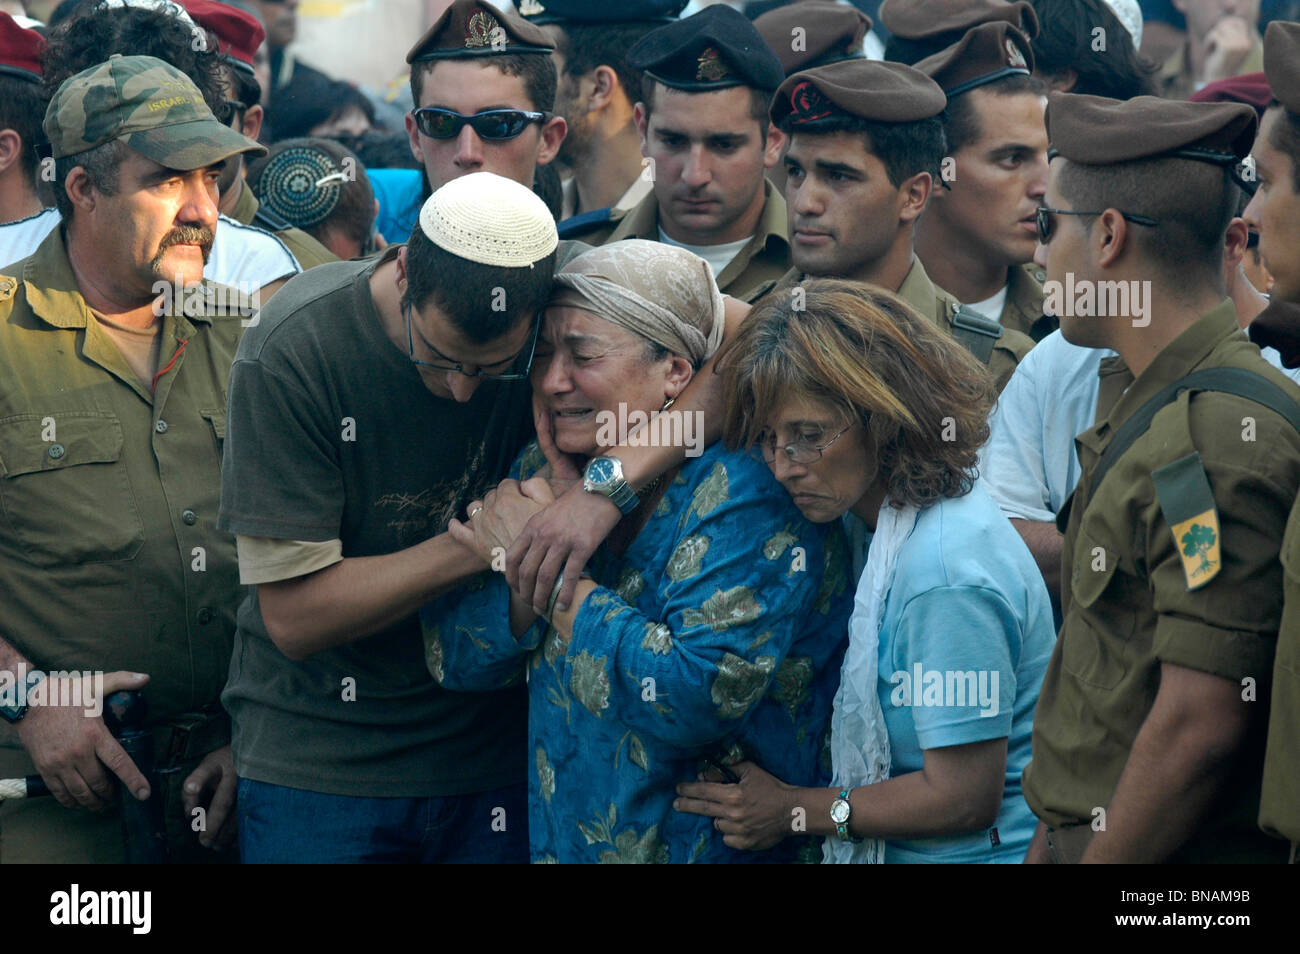 Relatives of Israeli soldier from the Golani brigade killed by Hezbollah in Lebanon during the  Israel - Hezbullah war comfort each other during a funeral in the city of Safed northern Israel Stock Photo